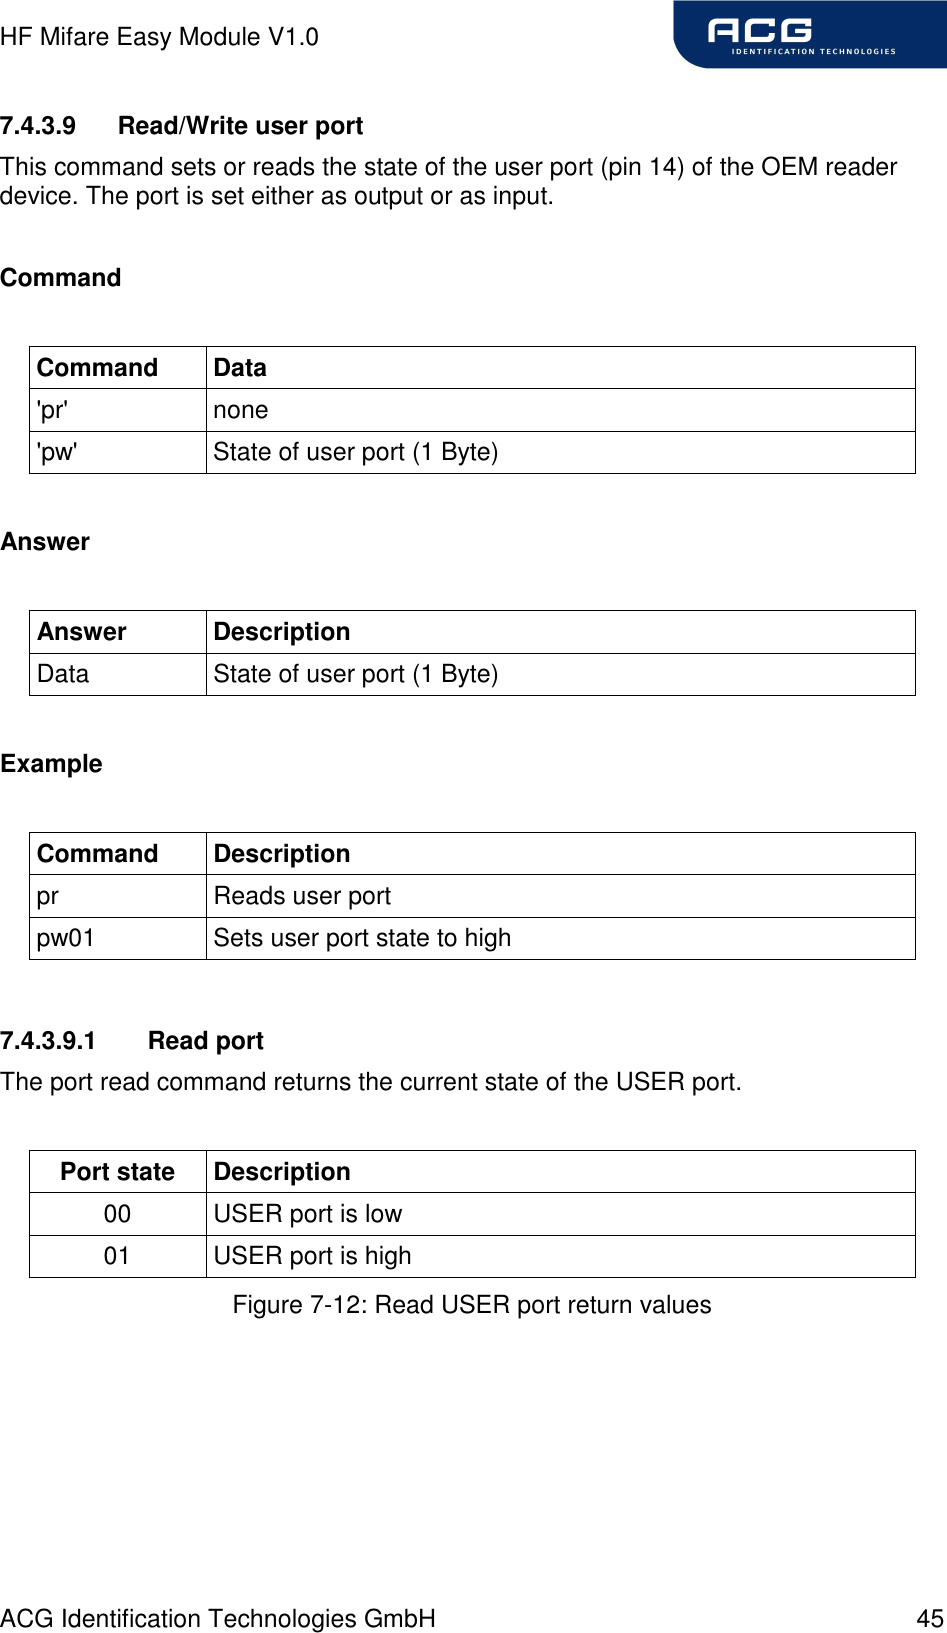 HF Mifare Easy Module V1.0 ACG Identification Technologies GmbH  45 7.4.3.9  Read/Write user port This command sets or reads the state of the user port (pin 14) of the OEM reader device. The port is set either as output or as input.  Command  Command  Data &apos;pr&apos;  none &apos;pw&apos;  State of user port (1 Byte)  Answer  Answer  Description Data  State of user port (1 Byte)  Example  Command  Description pr  Reads user port pw01  Sets user port state to high  7.4.3.9.1  Read port The port read command returns the current state of the USER port.  Port state  Description 00  USER port is low 01  USER port is high Figure 7-12: Read USER port return values 